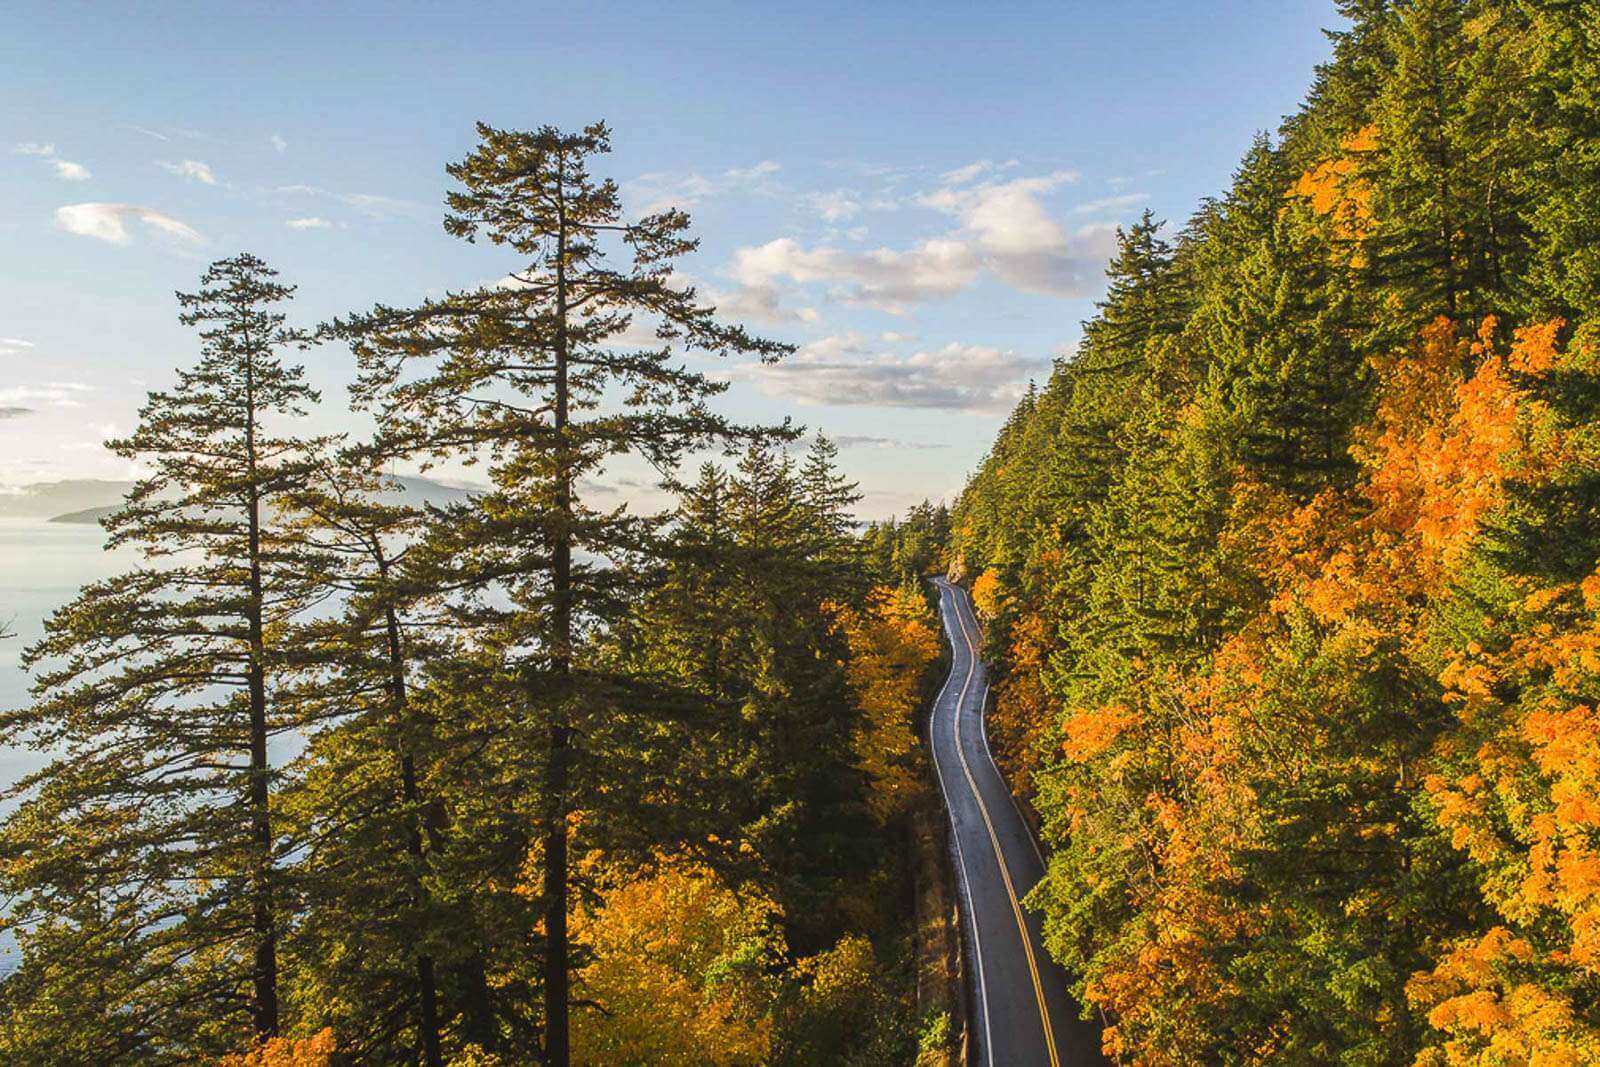 Where to find fall colors in Washington - Chuckanut Drive